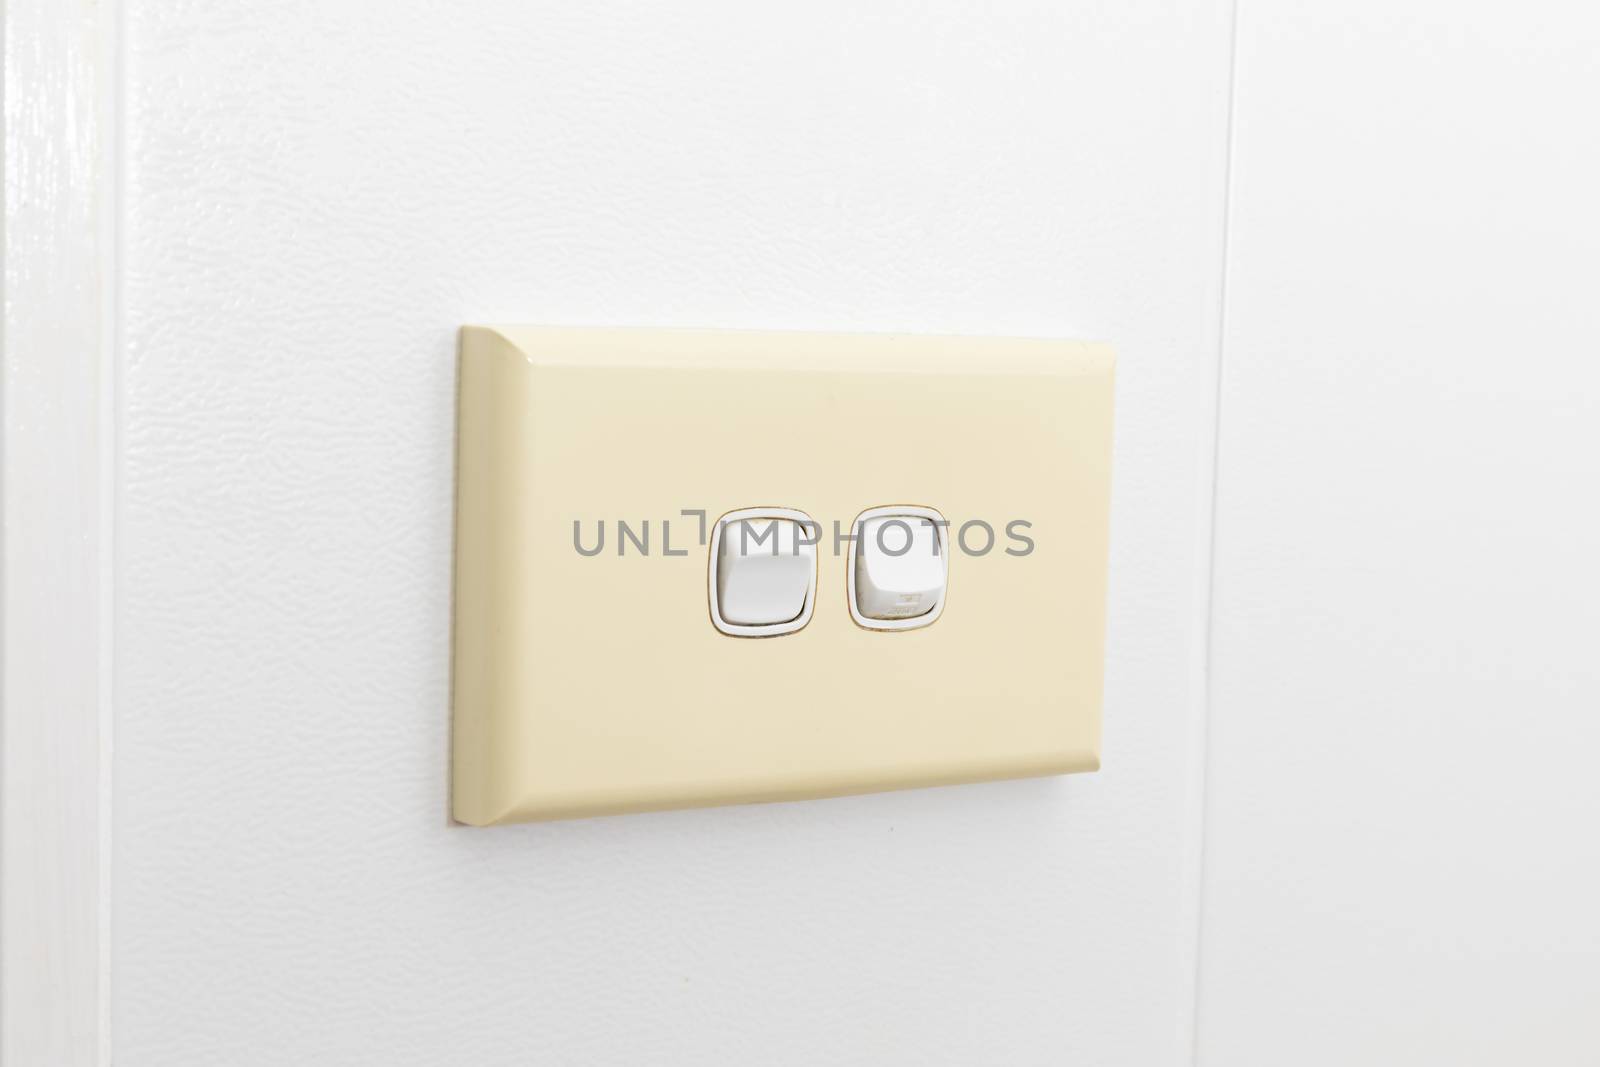 A double light switch on a white tiled wall by WittkePhotos